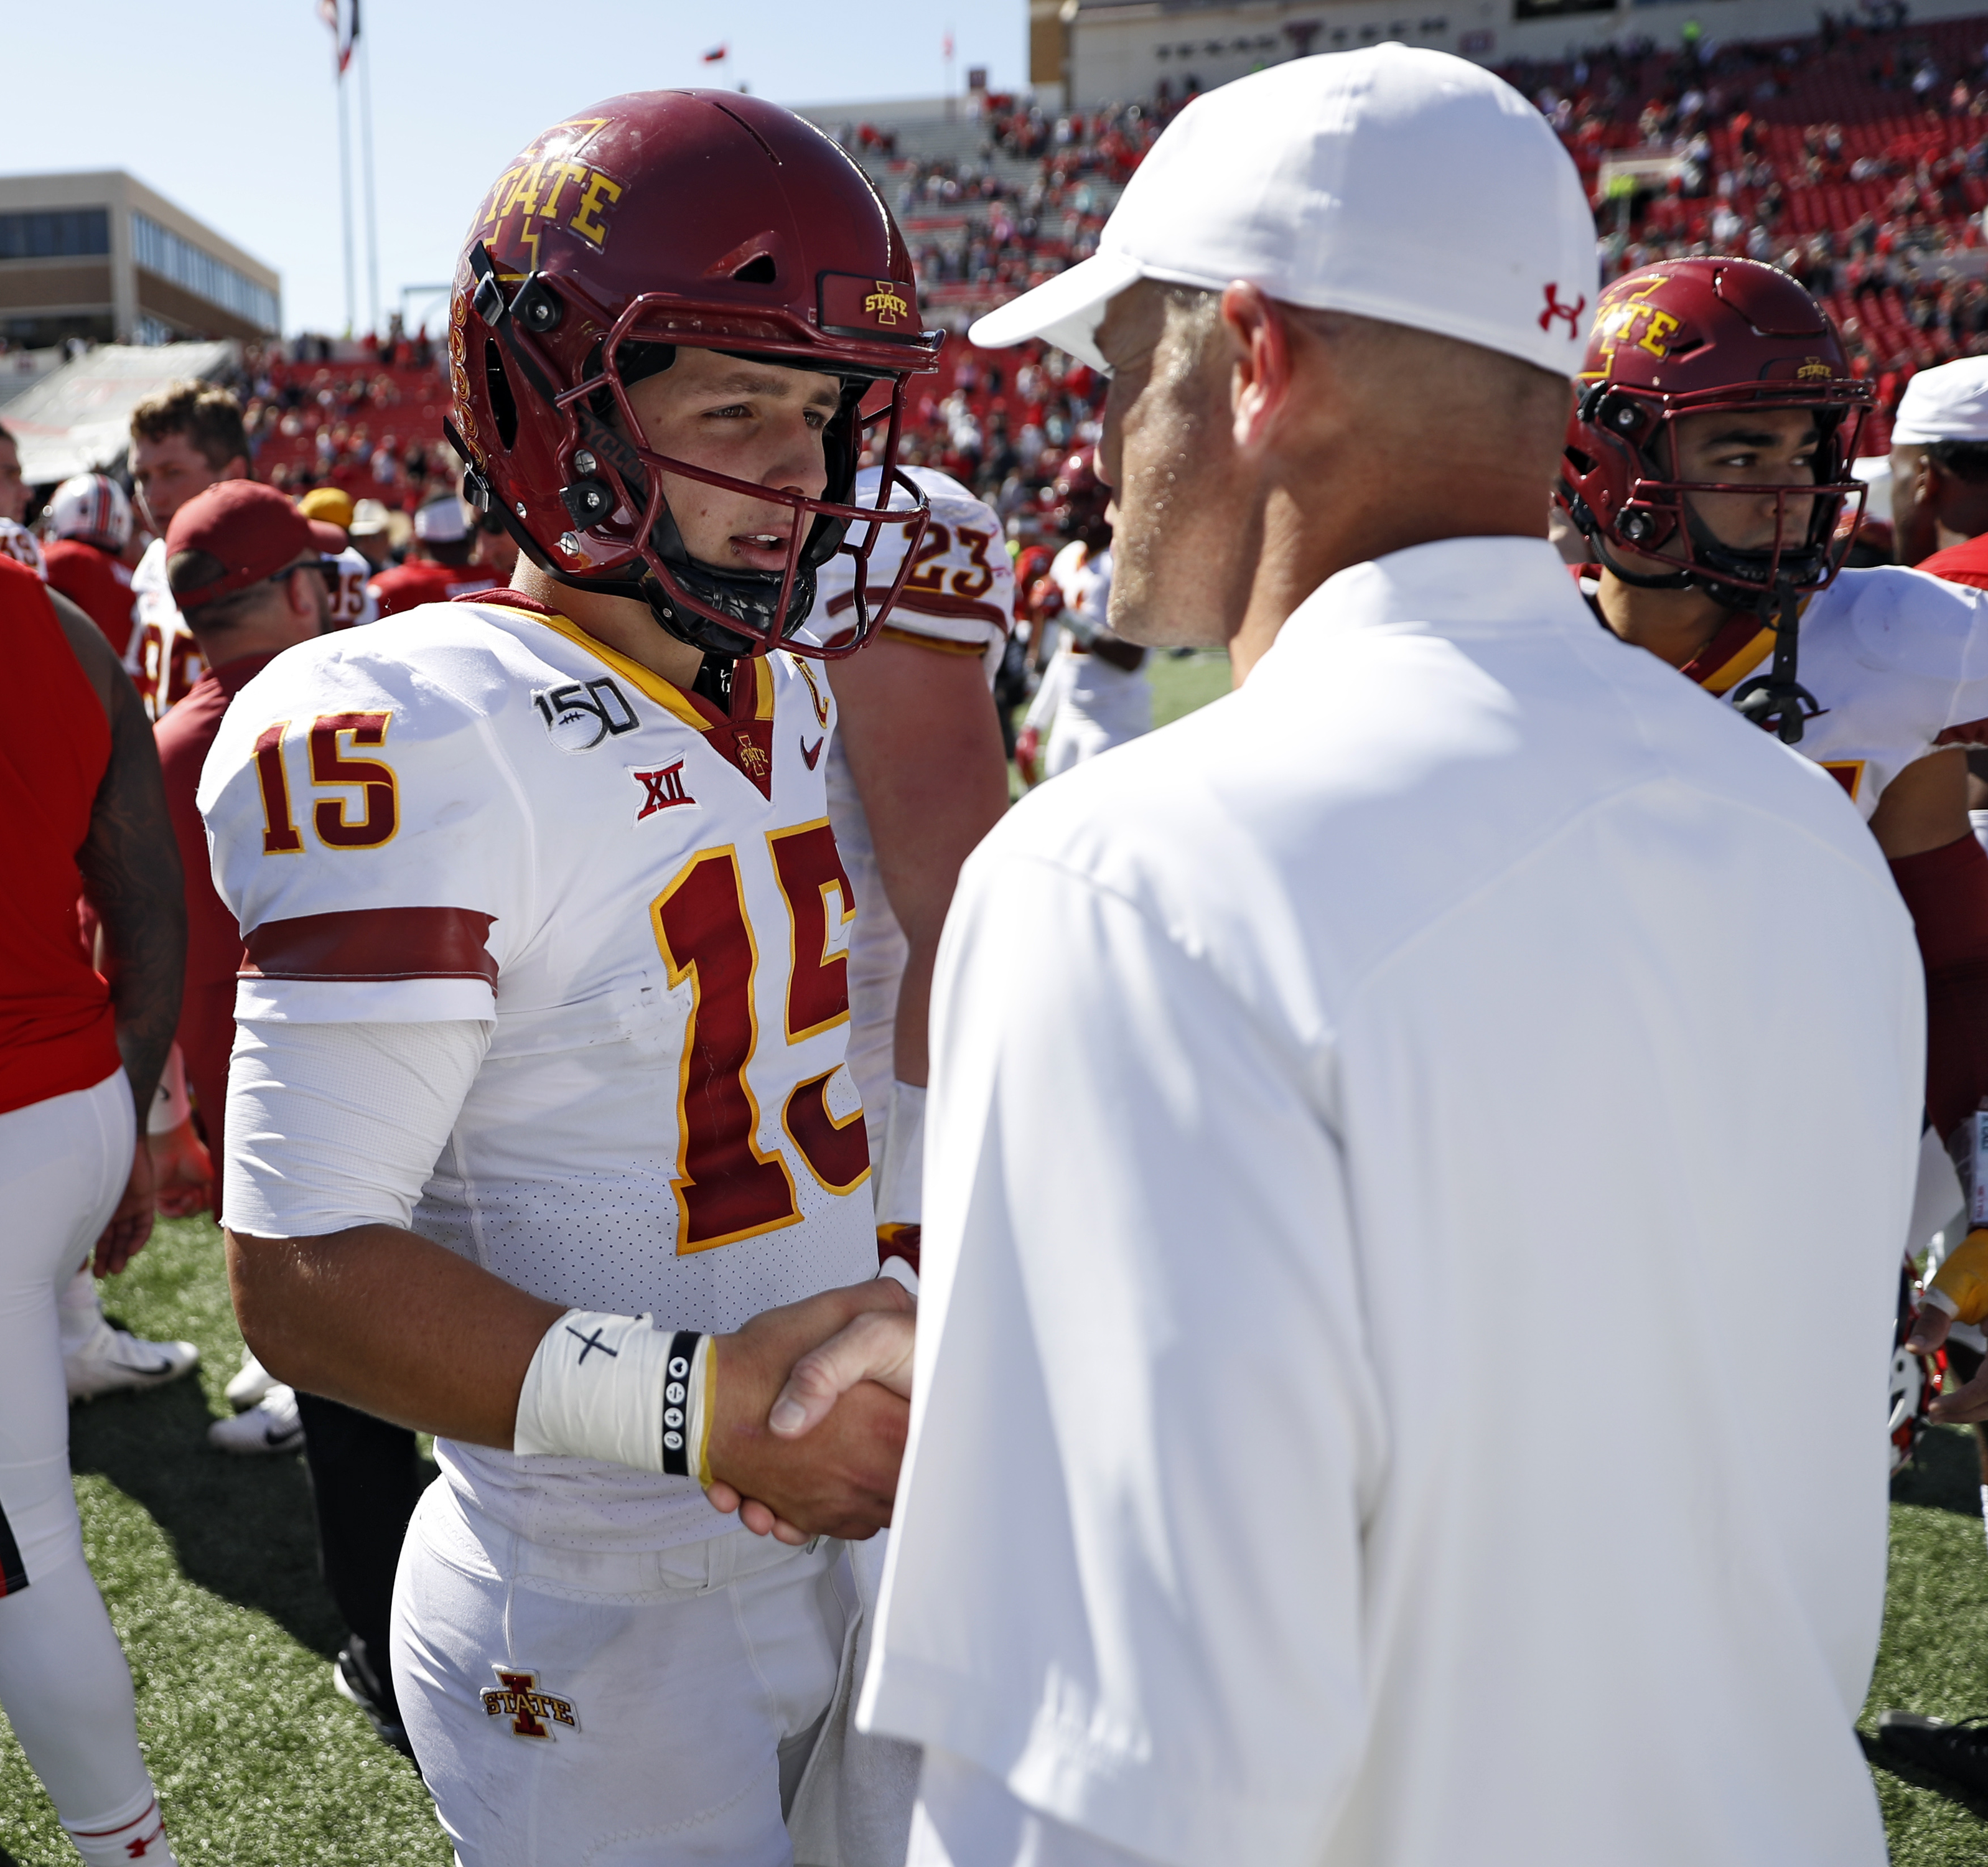 RED RAIDER PODCAST: Can Tech bounce back at Iowa State?